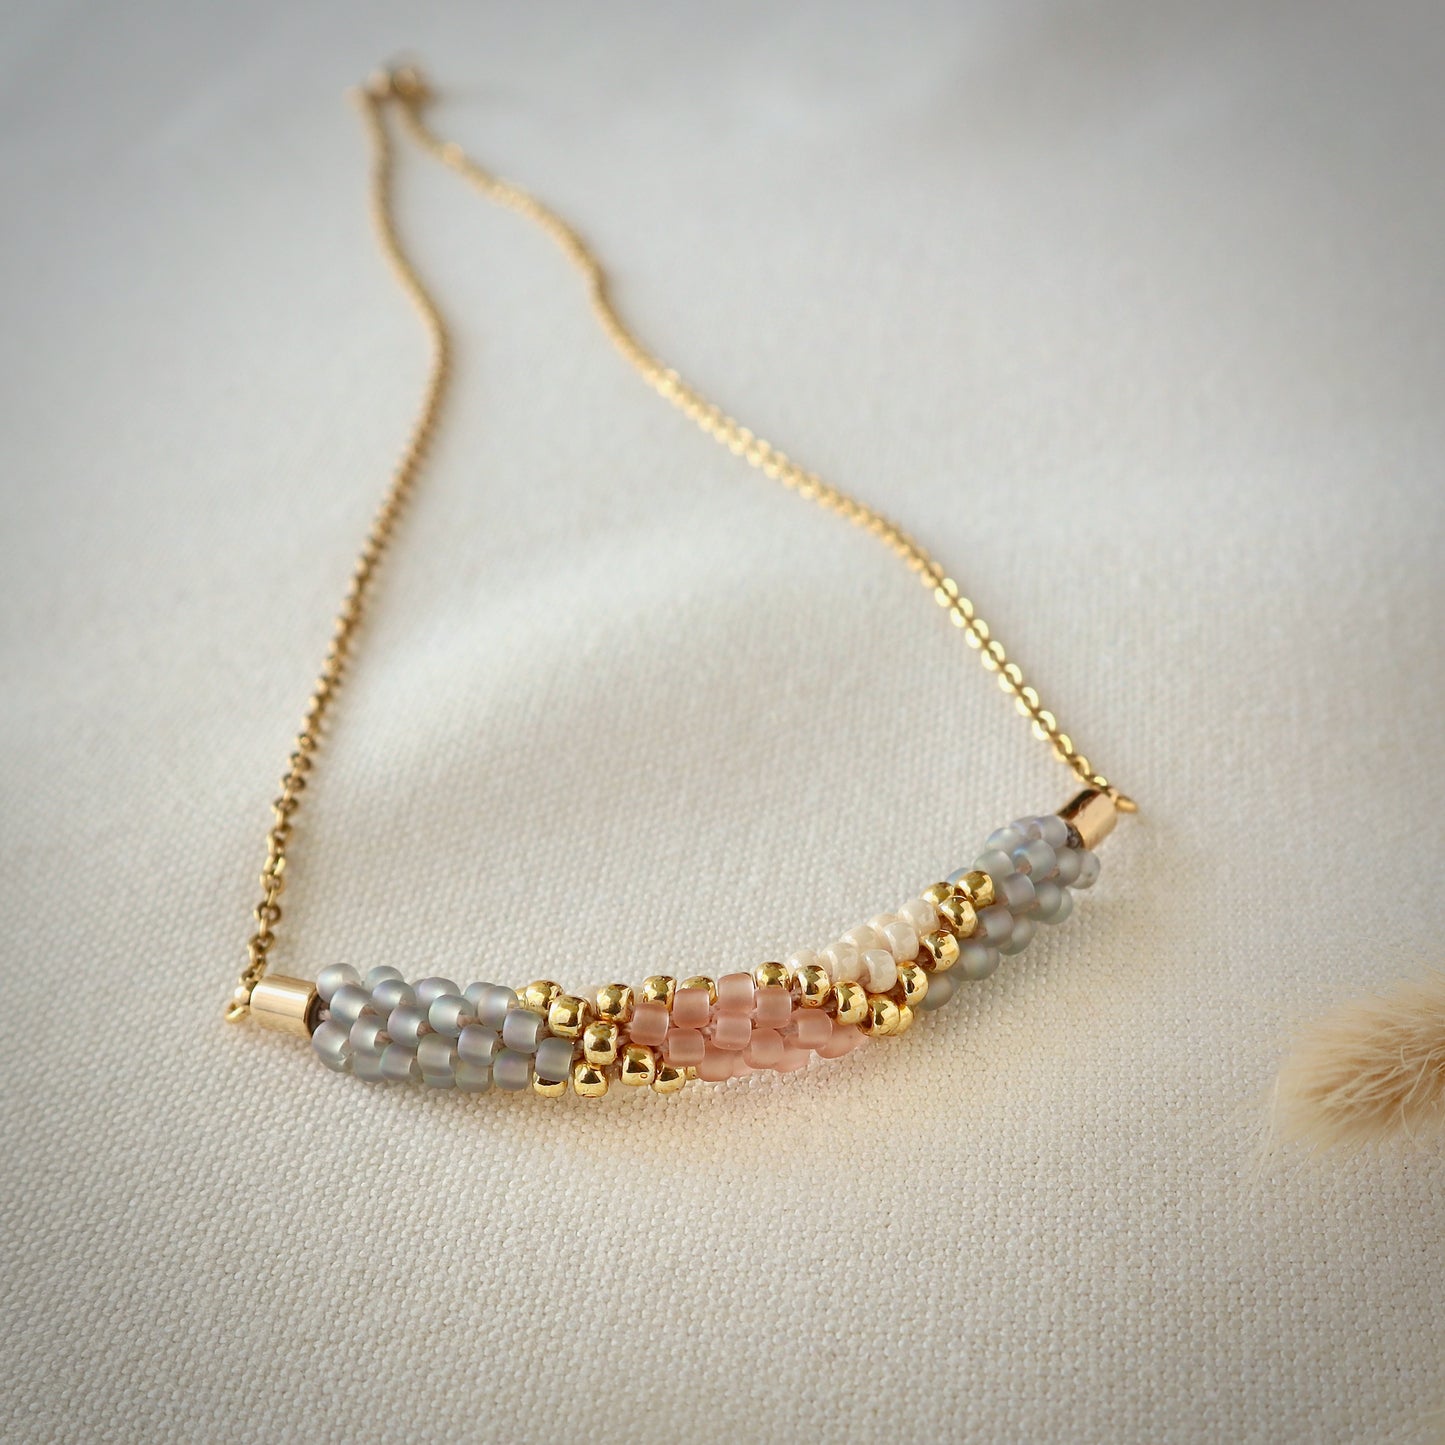 Rosy Sky Braided Bracelet - Dreamy pink, cream and grey Beaded Bar Pendant Necklace with gold accents. Braided with Japanese Glass Seed Beads using the Kumihimo technique - Southeast Sparrow Jewellery